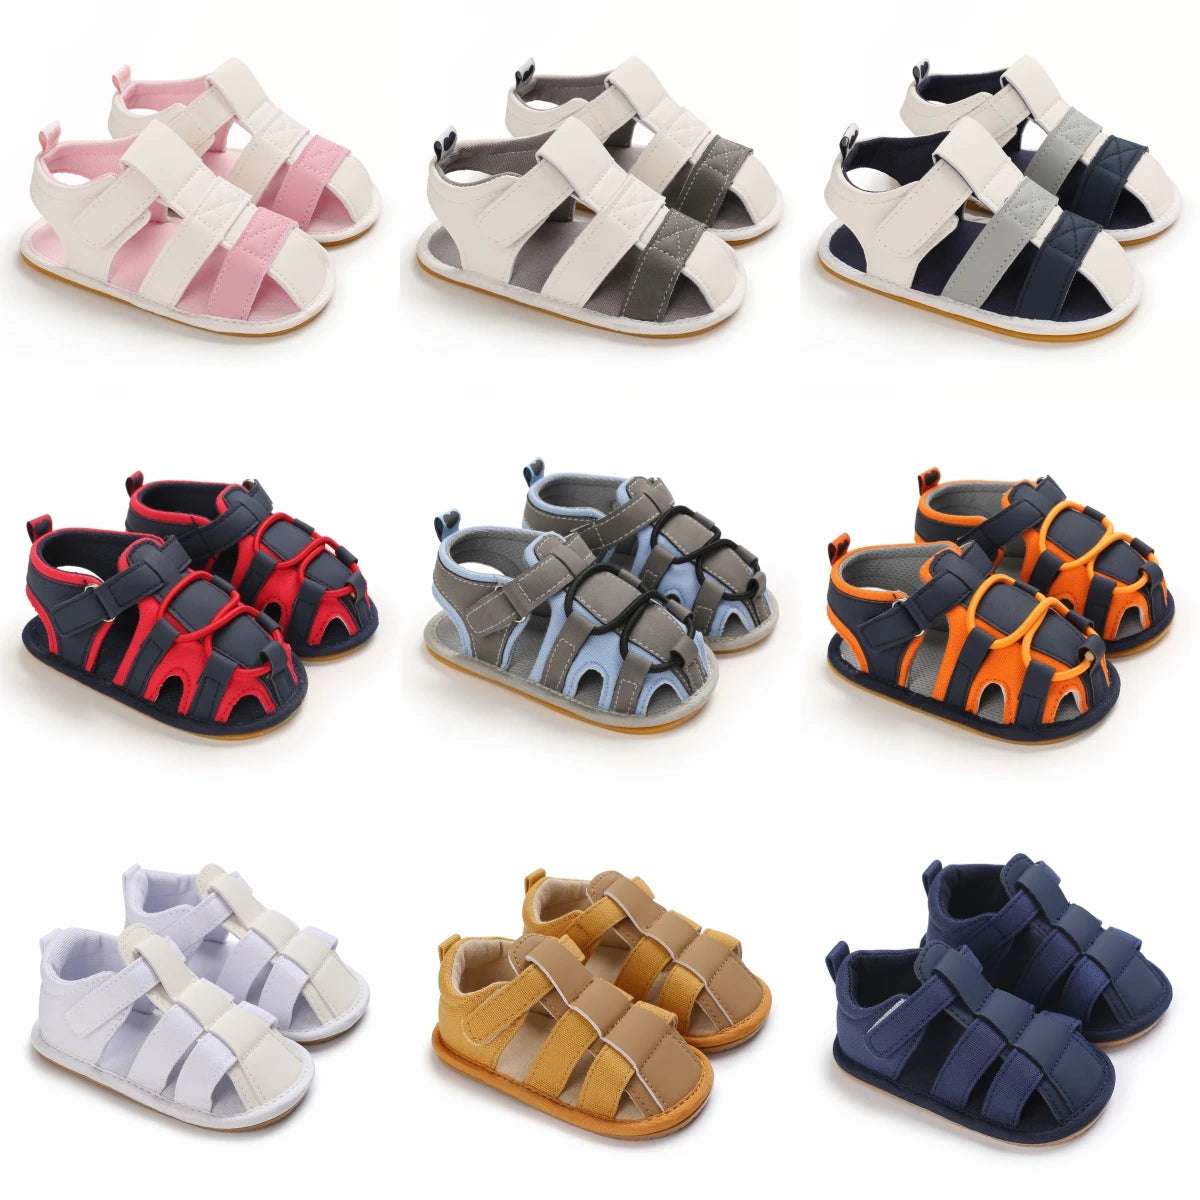 Fashionable Summer Baby Girl And Boy Sandals 0-18M Newborn Baby Shoes Casual Rubber Sole Anti Slip Breathable Shoes Pre Walker